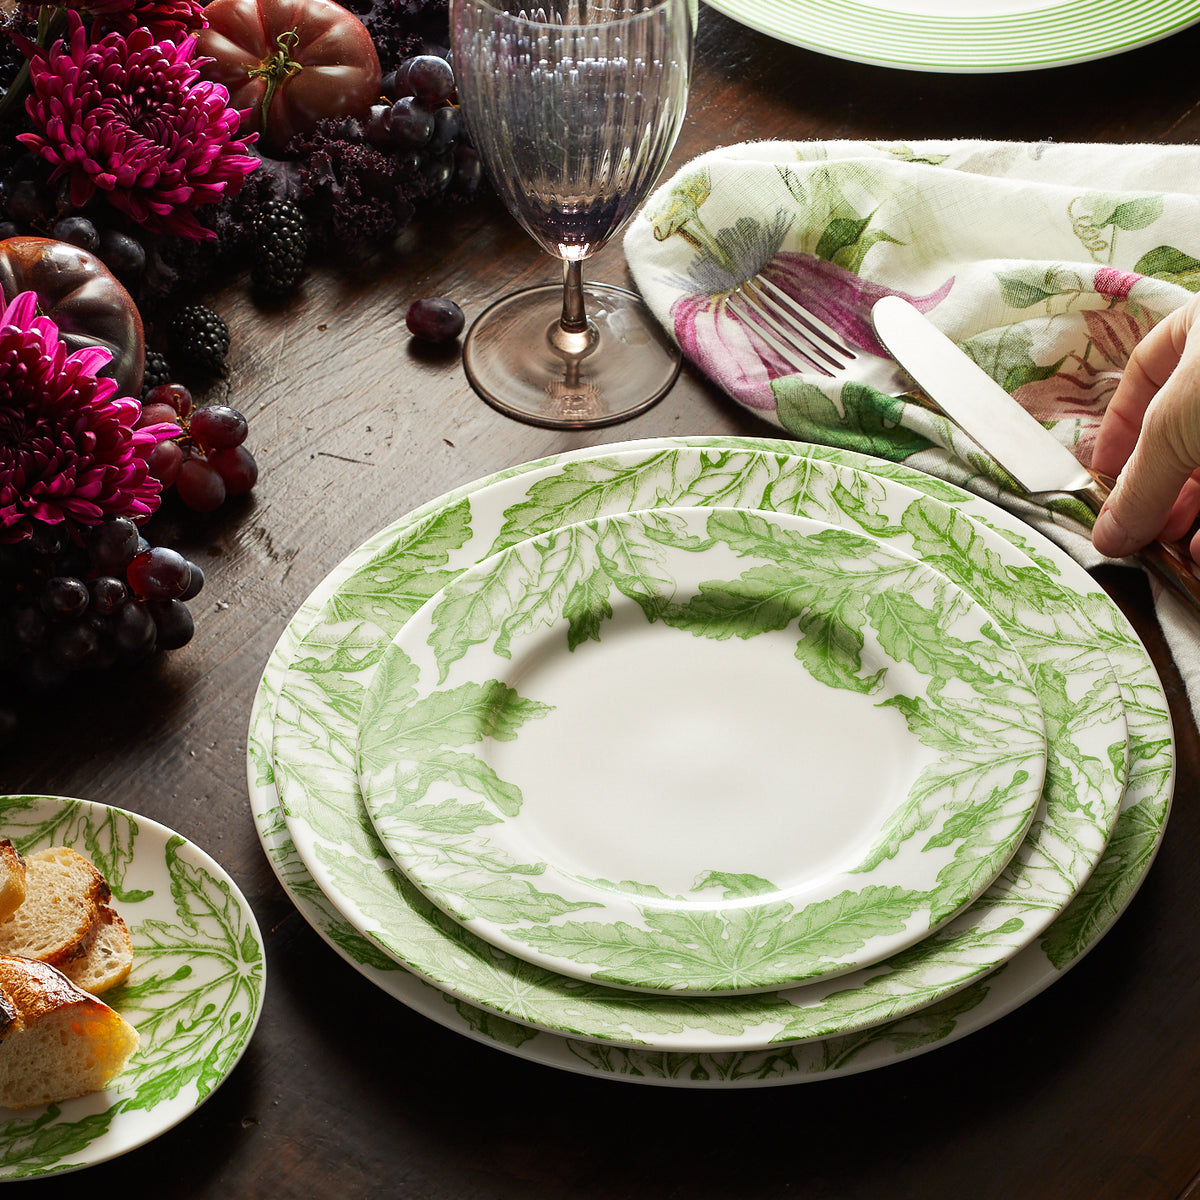 Freya carefully sets a Caskata Artisanal Home Freya Rimmed Salad Plate adorned with delicate green florals on the table.